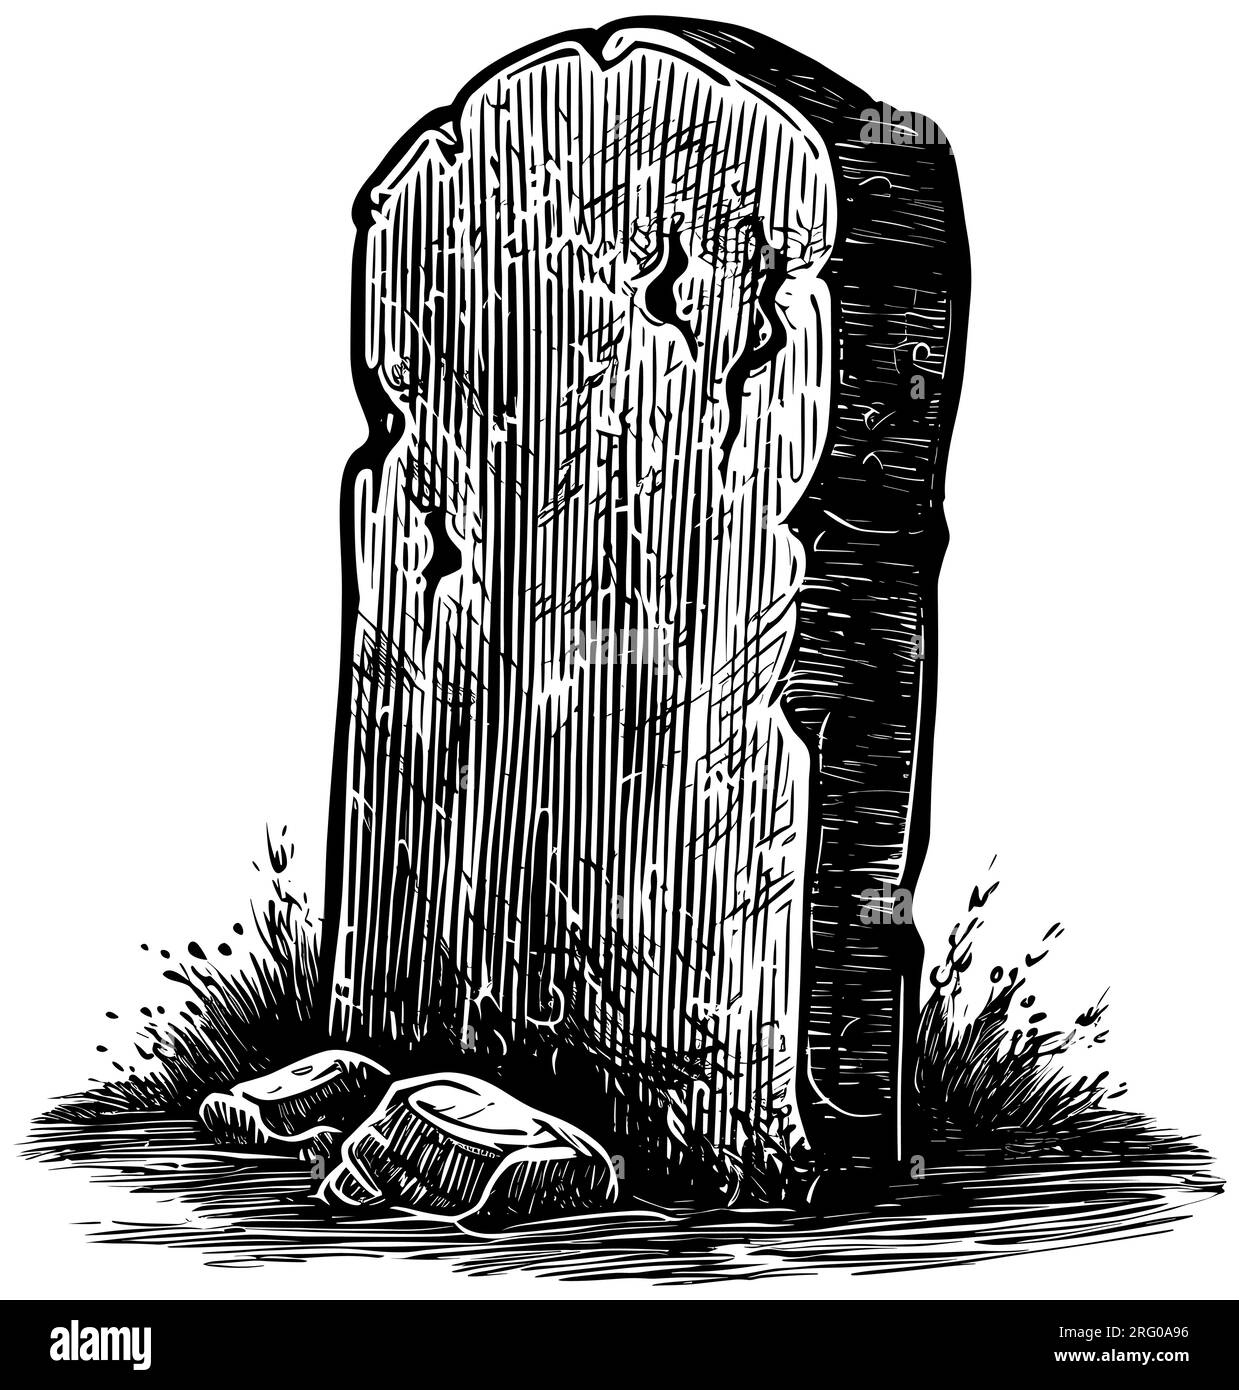 Tombstone Black and White Stock Vector